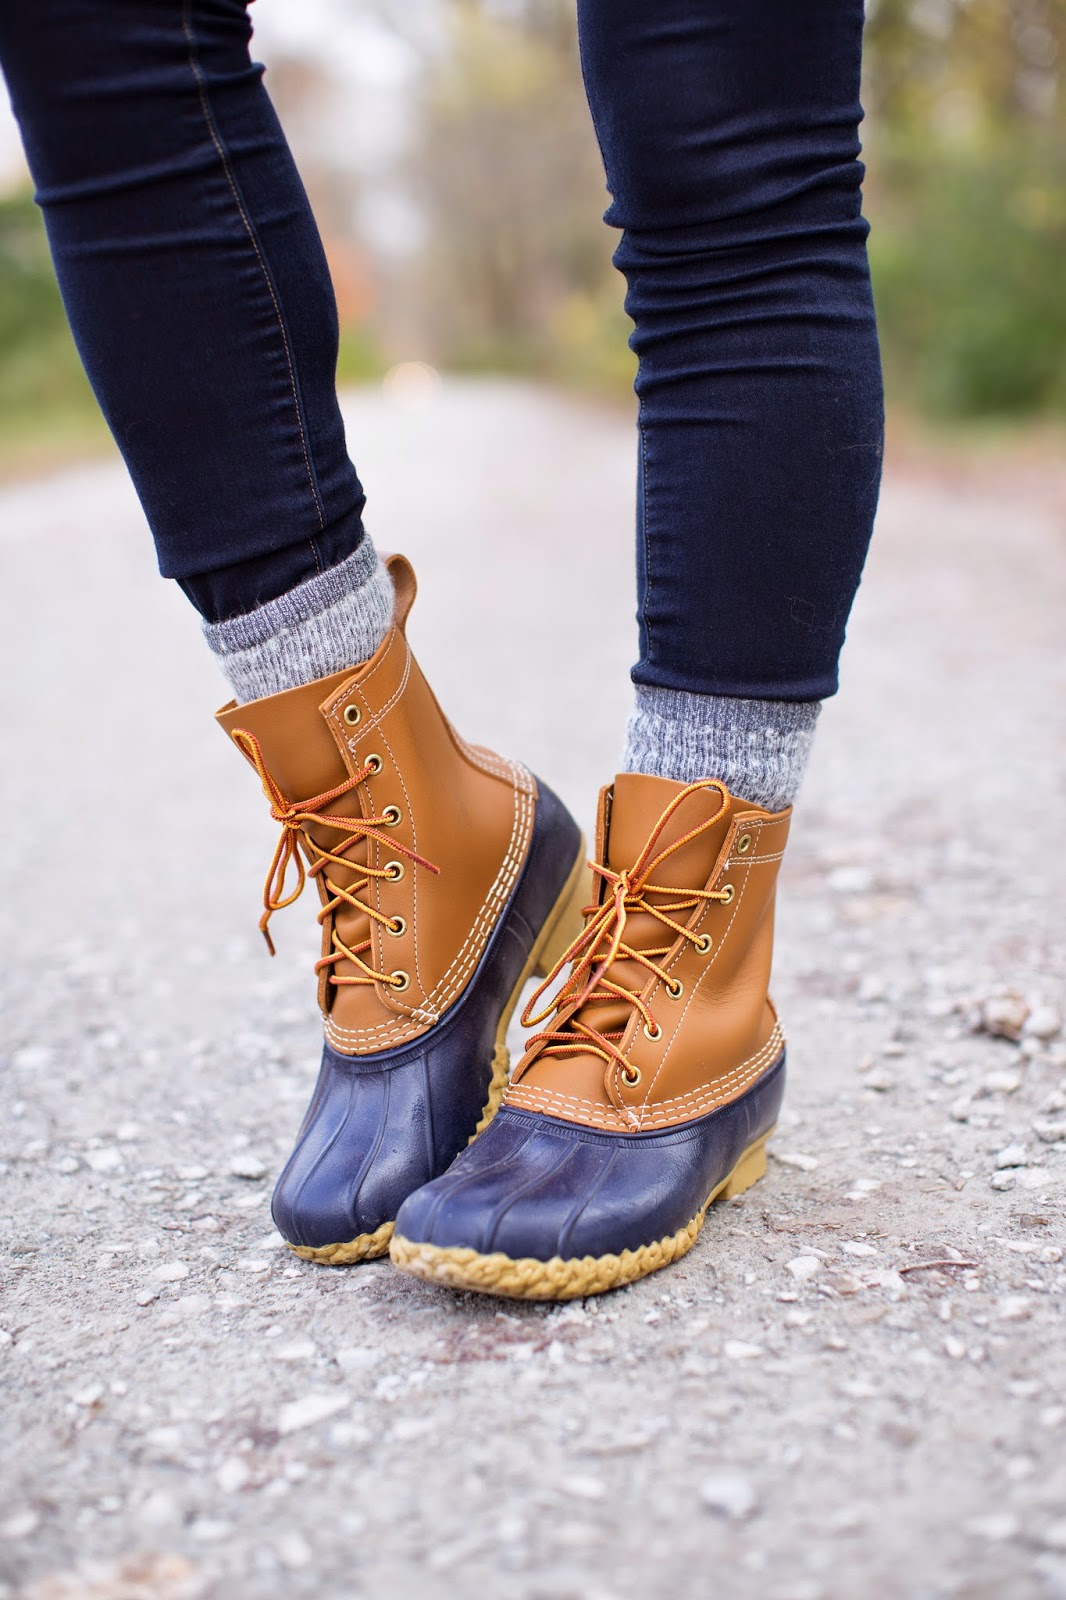 navy bean boots, navy duck boots, preppy duck boots, thick wool socks, preppy duckboots, fall style, fall fashion, fall style inspiration, a southern drawl fall outfits, cute fall outfits, preppy fall outfits, southern fashion blogger // grace wainwright a southern drawl